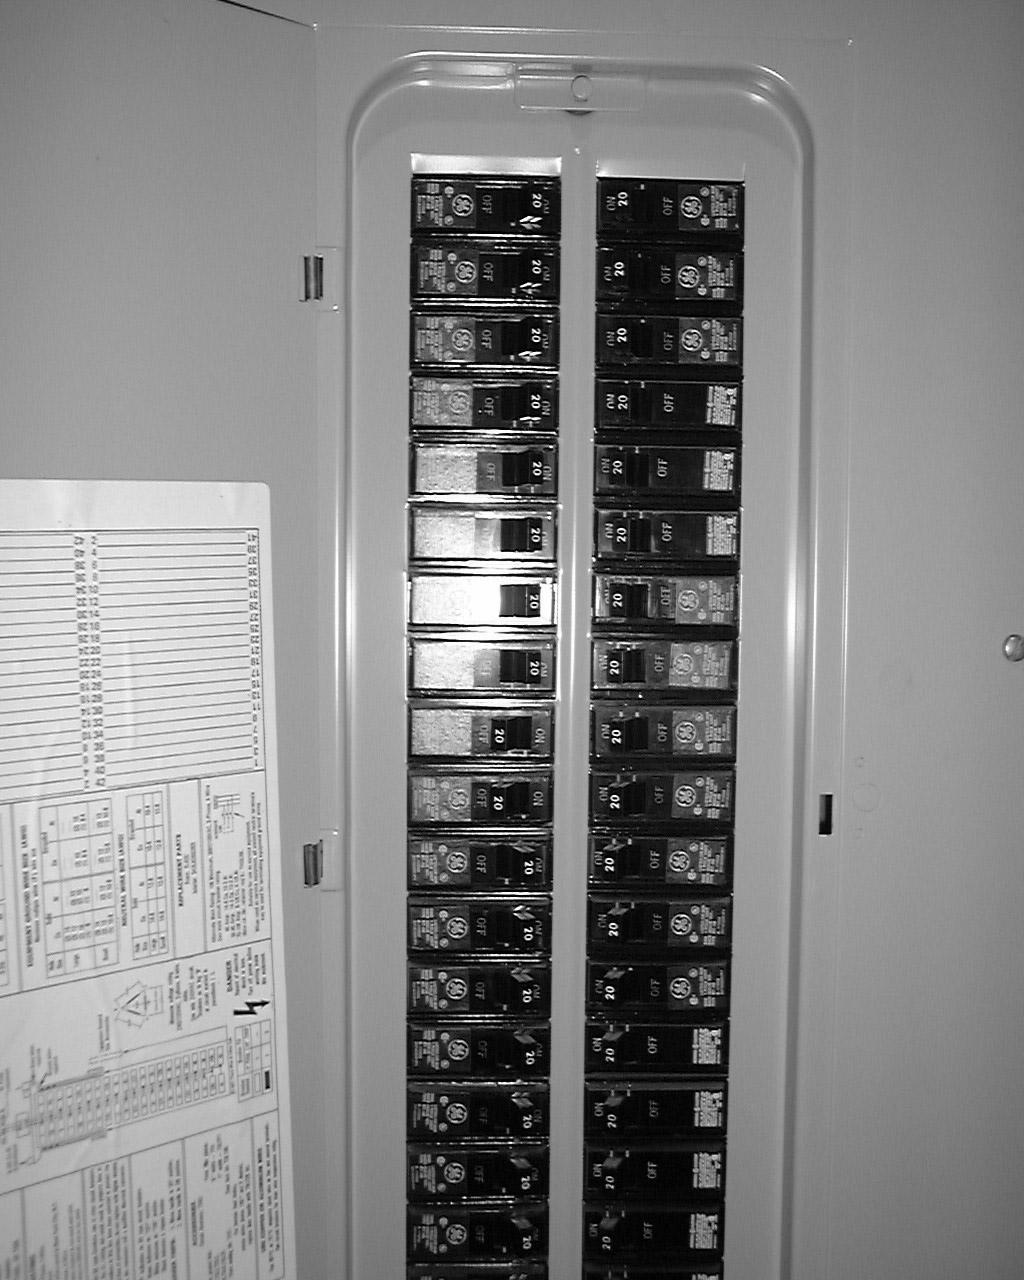 other side of the outlet box. 4. Before you begin installing the fan, Switch power off at Service panel and lock service disconnecting means to prevent power from being switched on accidentally.